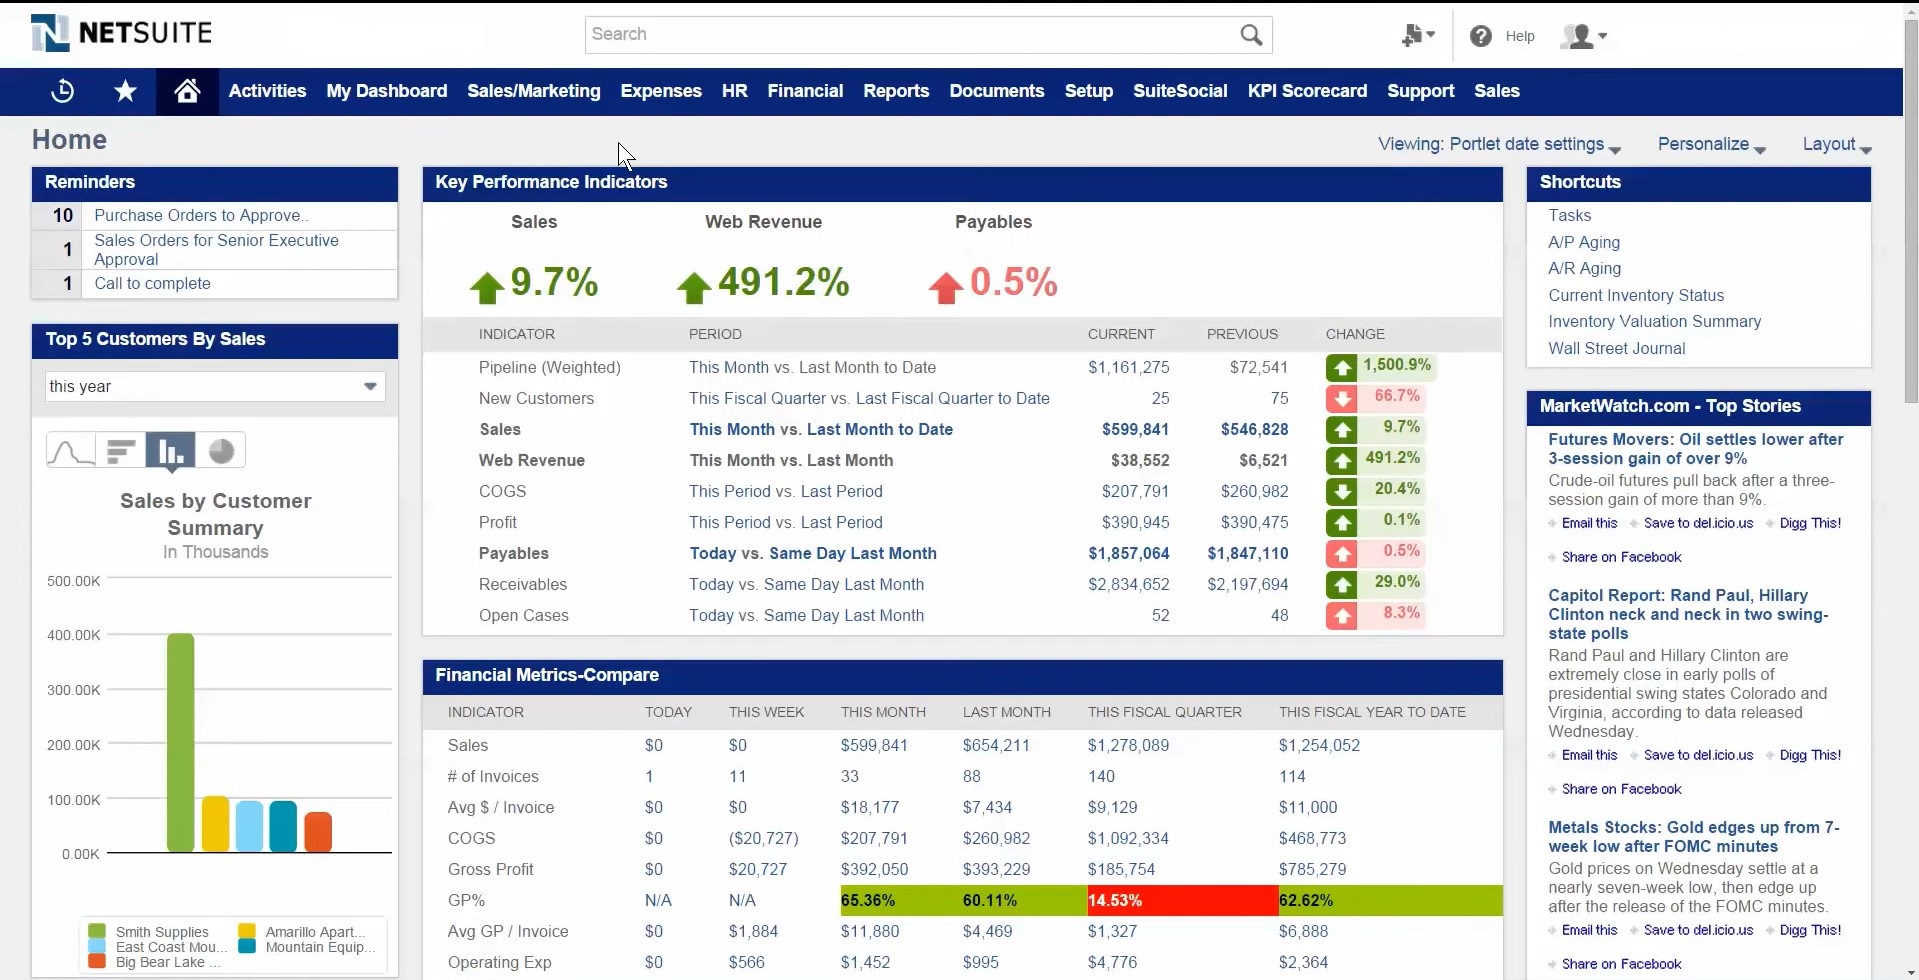 NetSuite Dashboard Home page